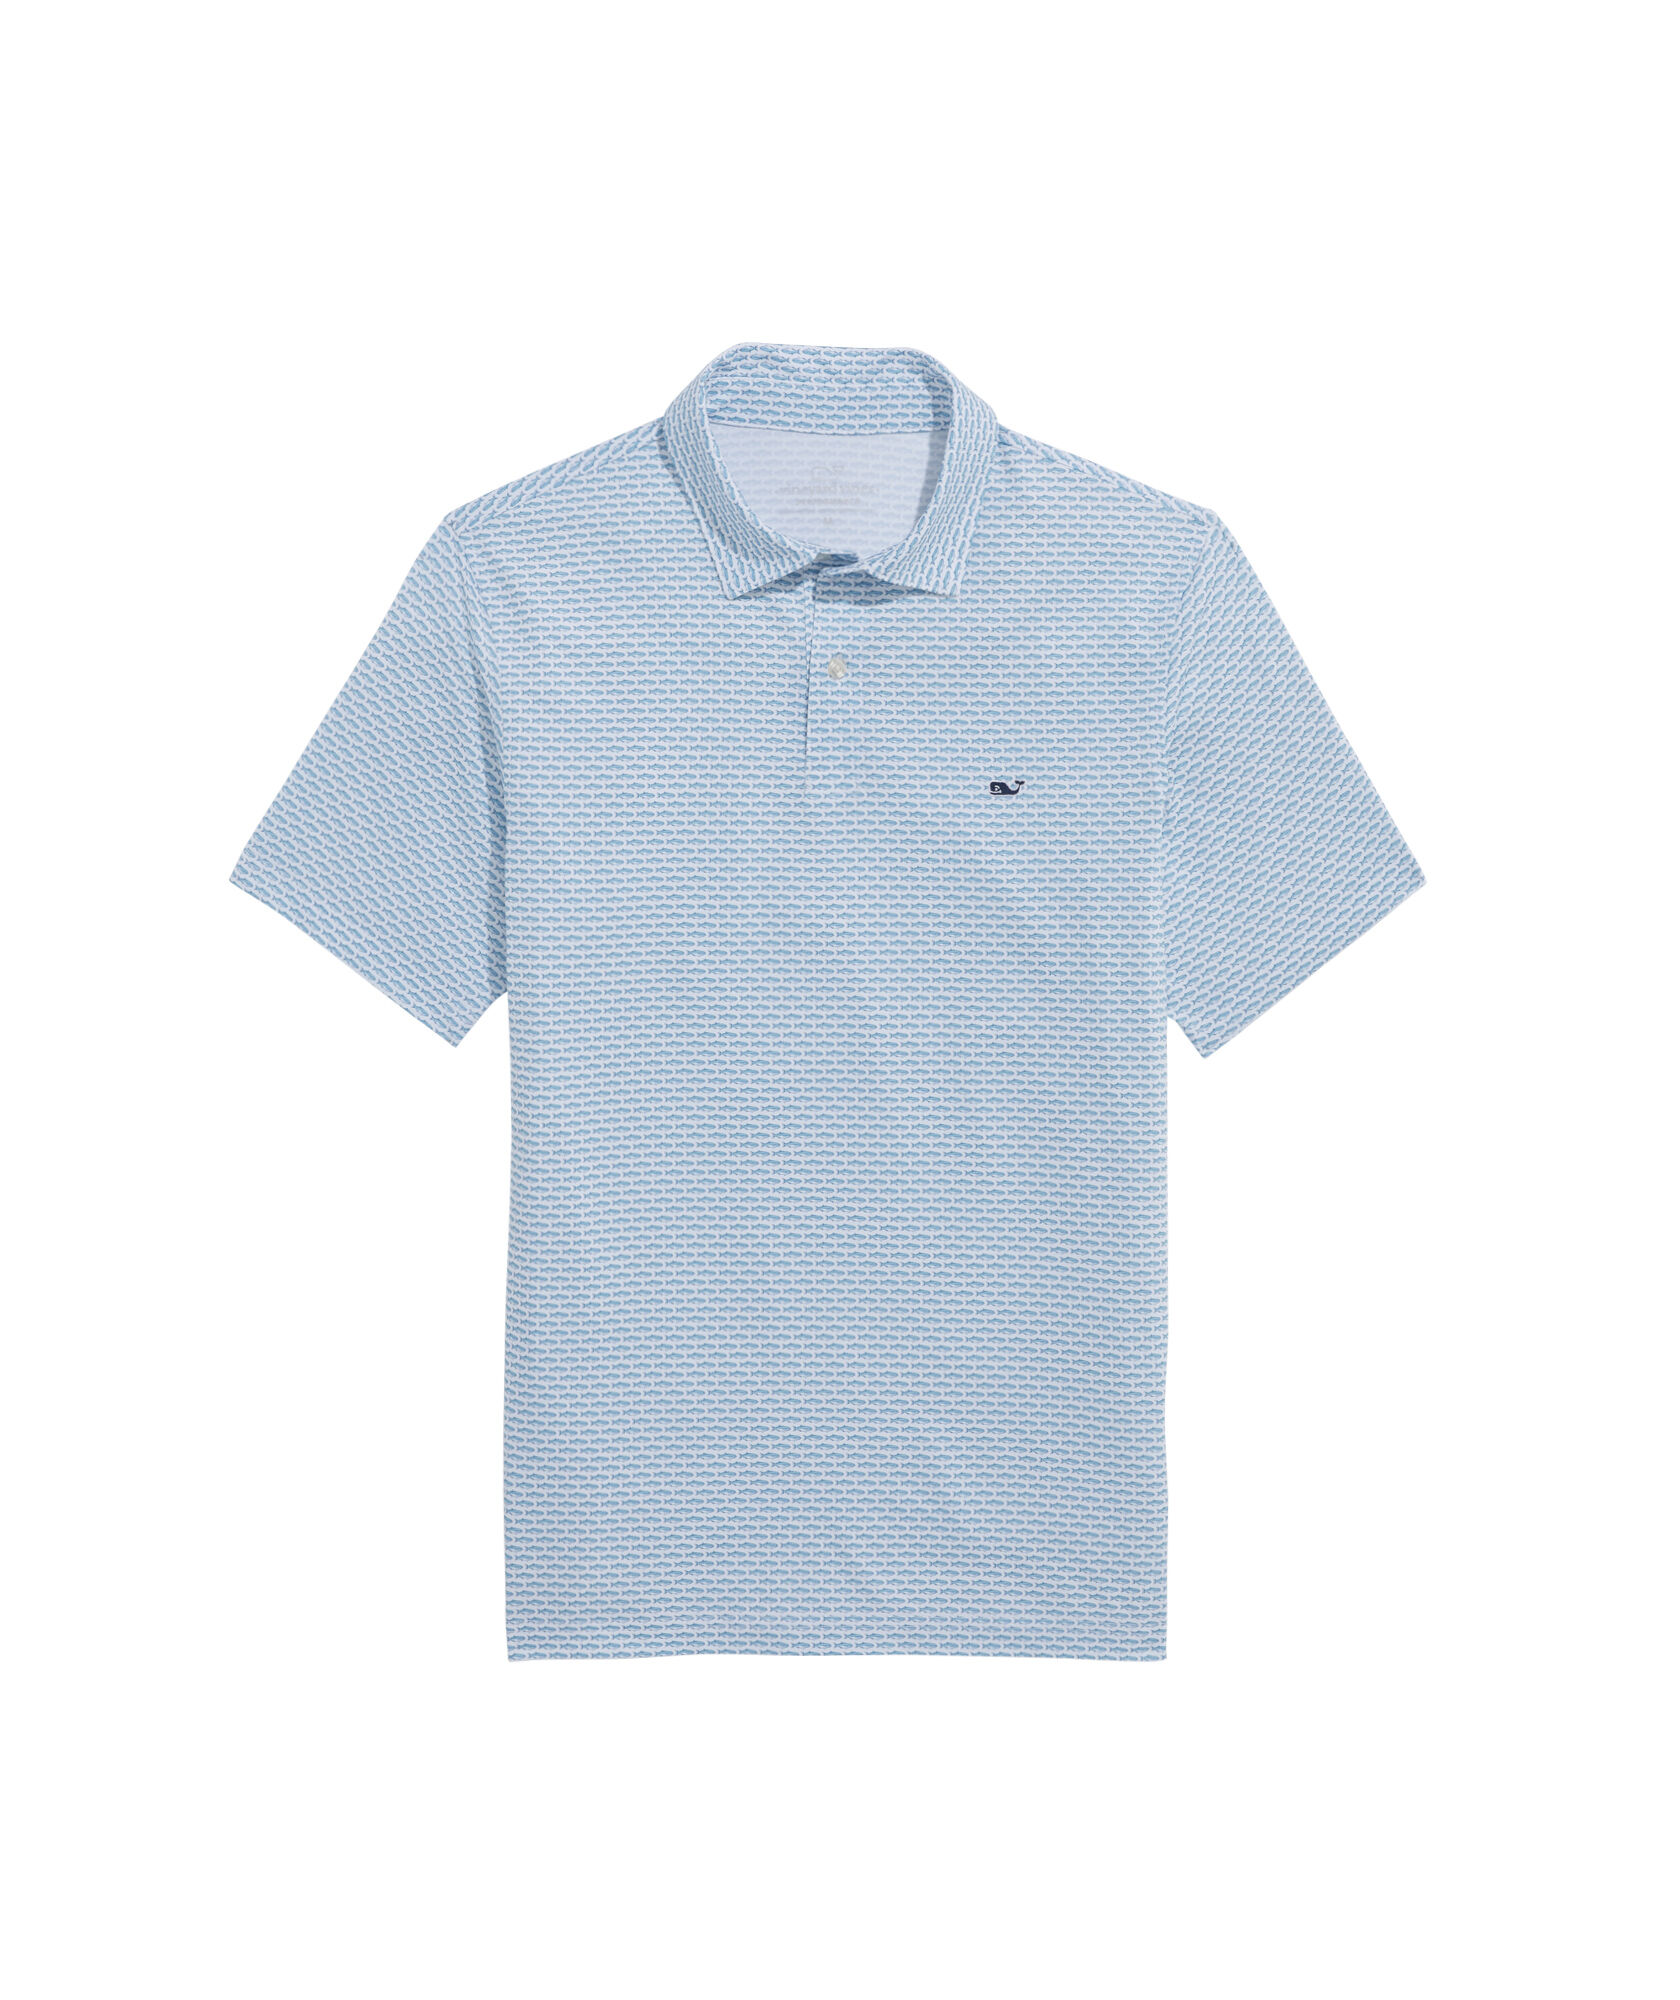 OUTLET Boys' Printed Performance Polo